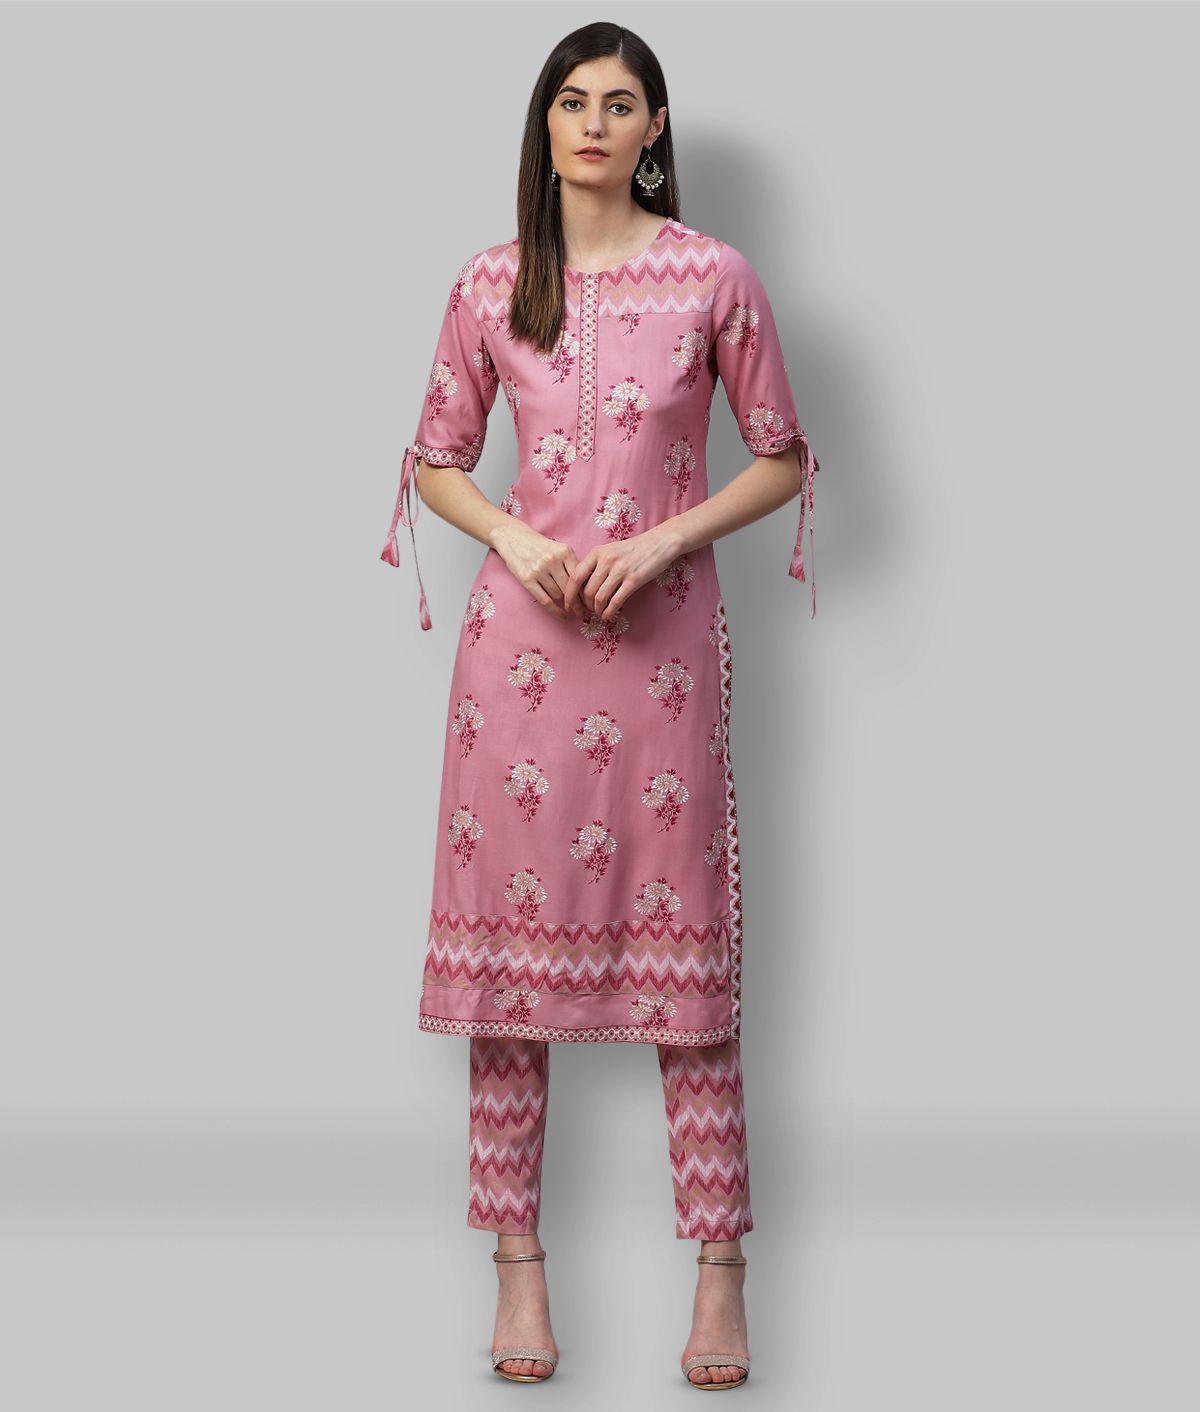     			Yash Gallery - Peach Straight Rayon Women's Stitched Salwar Suit ( Pack of 1 )